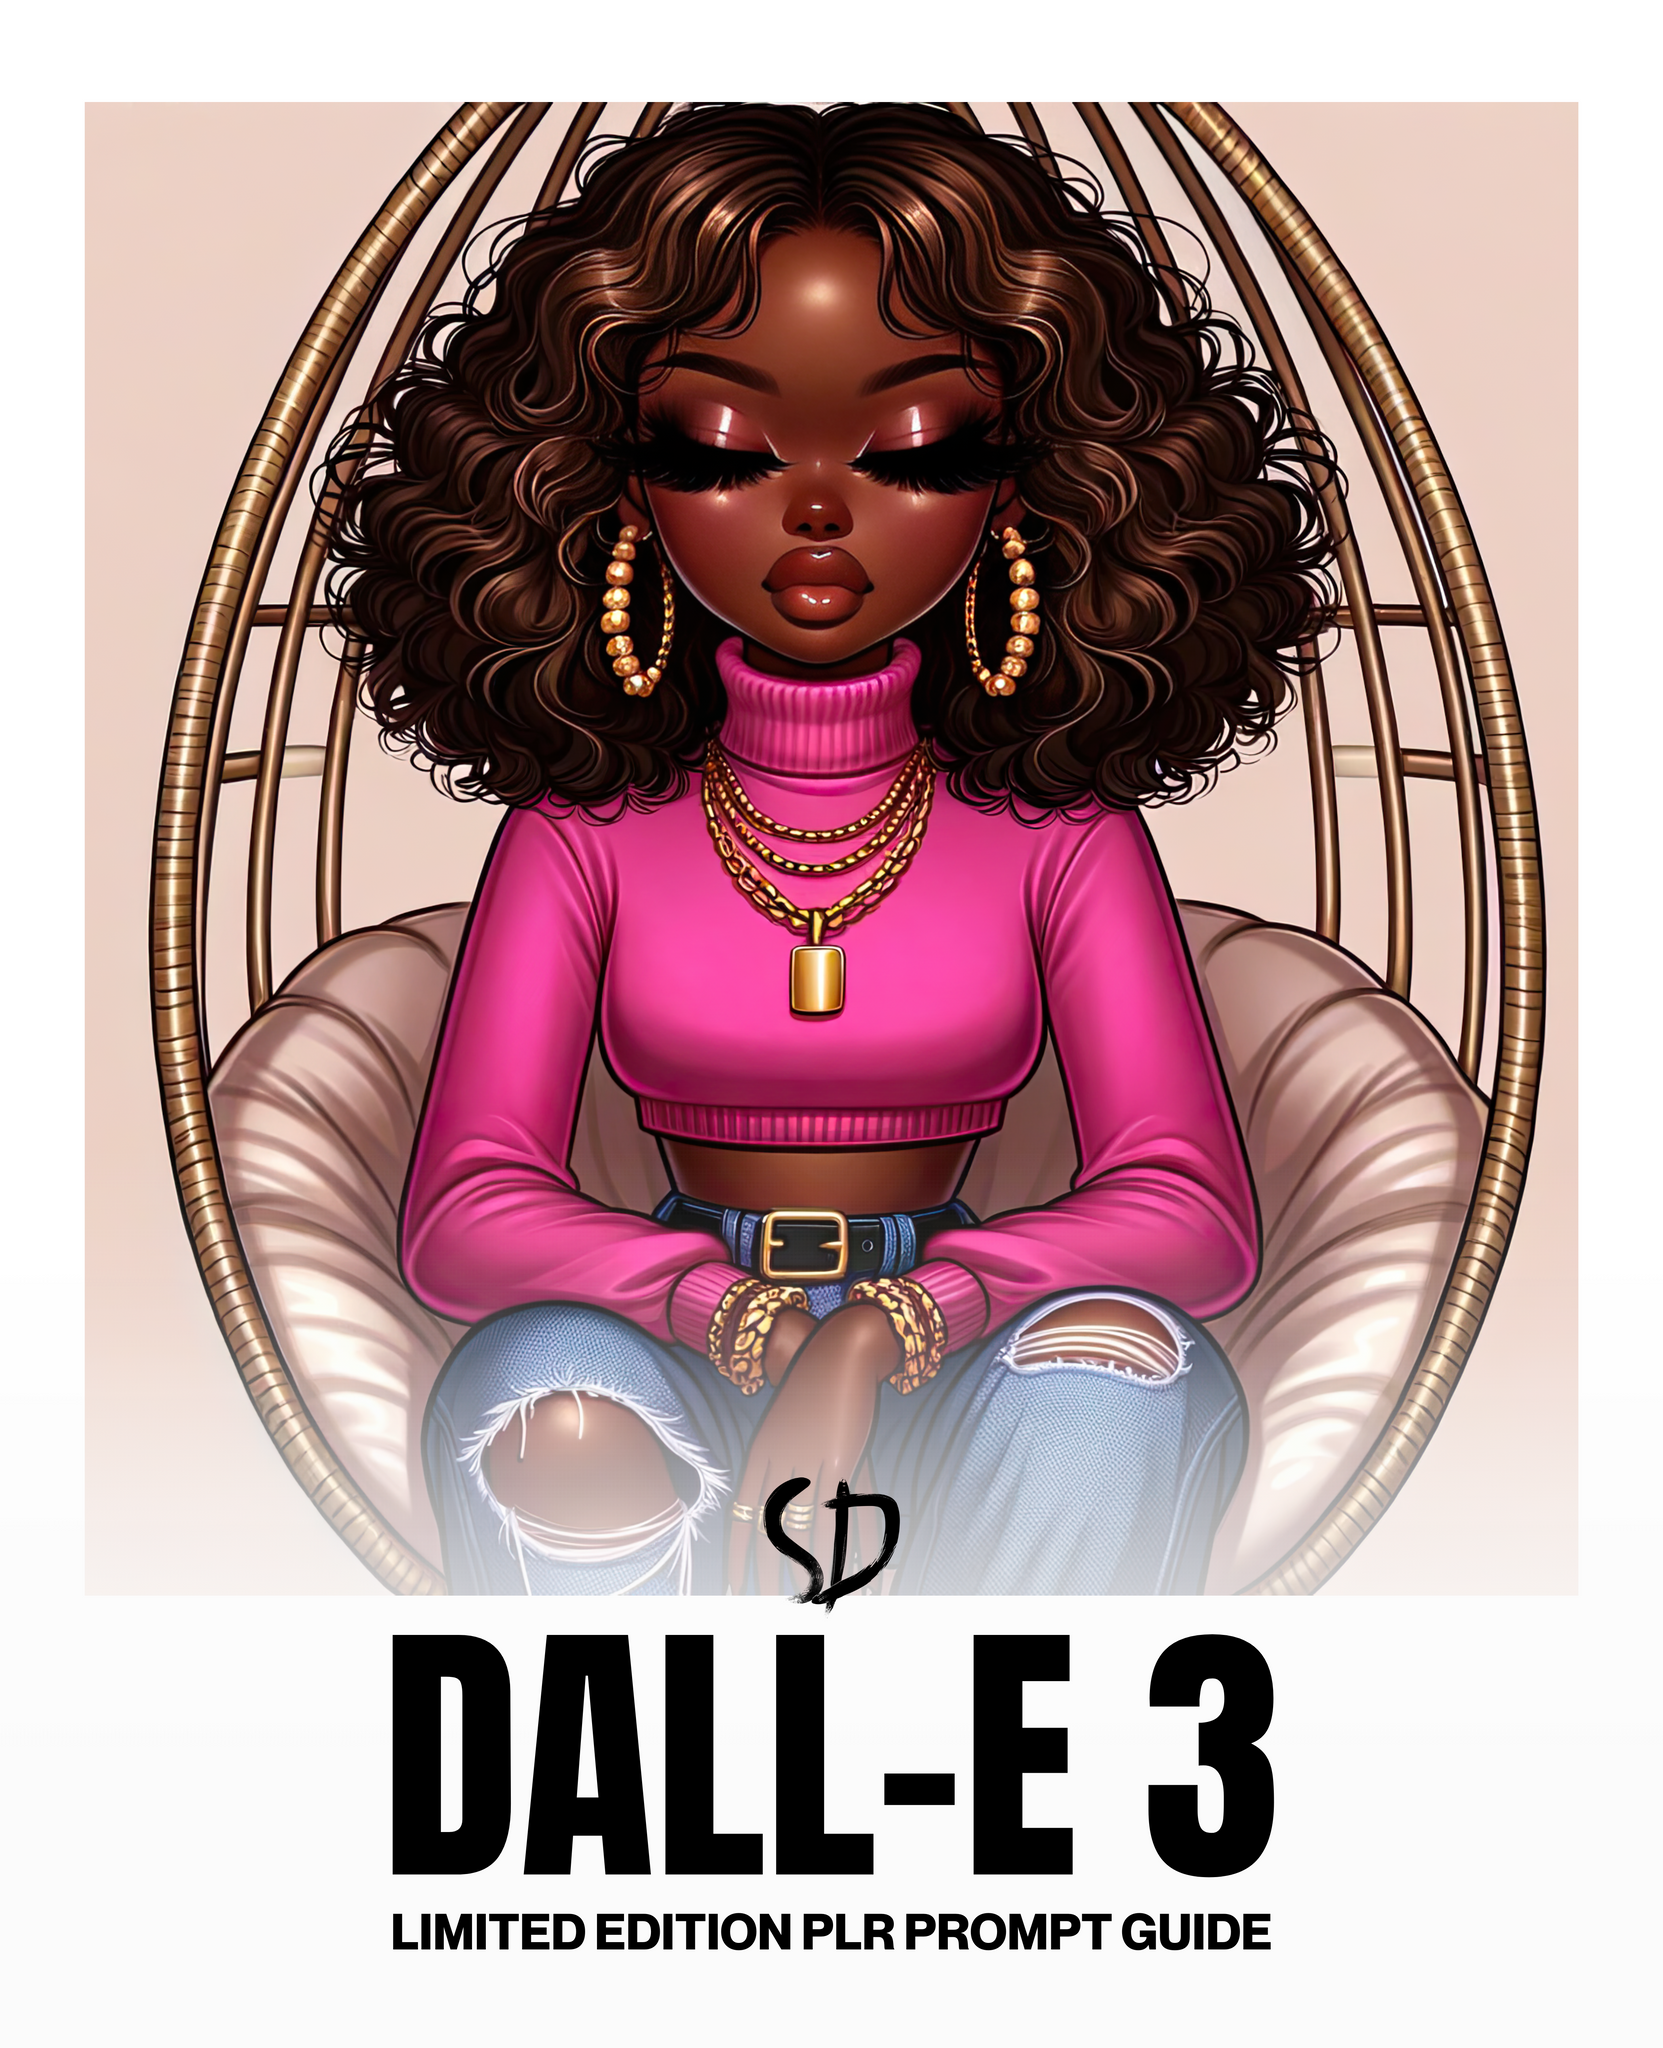 Peacefulness | Limited Edition Dall-E 3 Prompt Guide